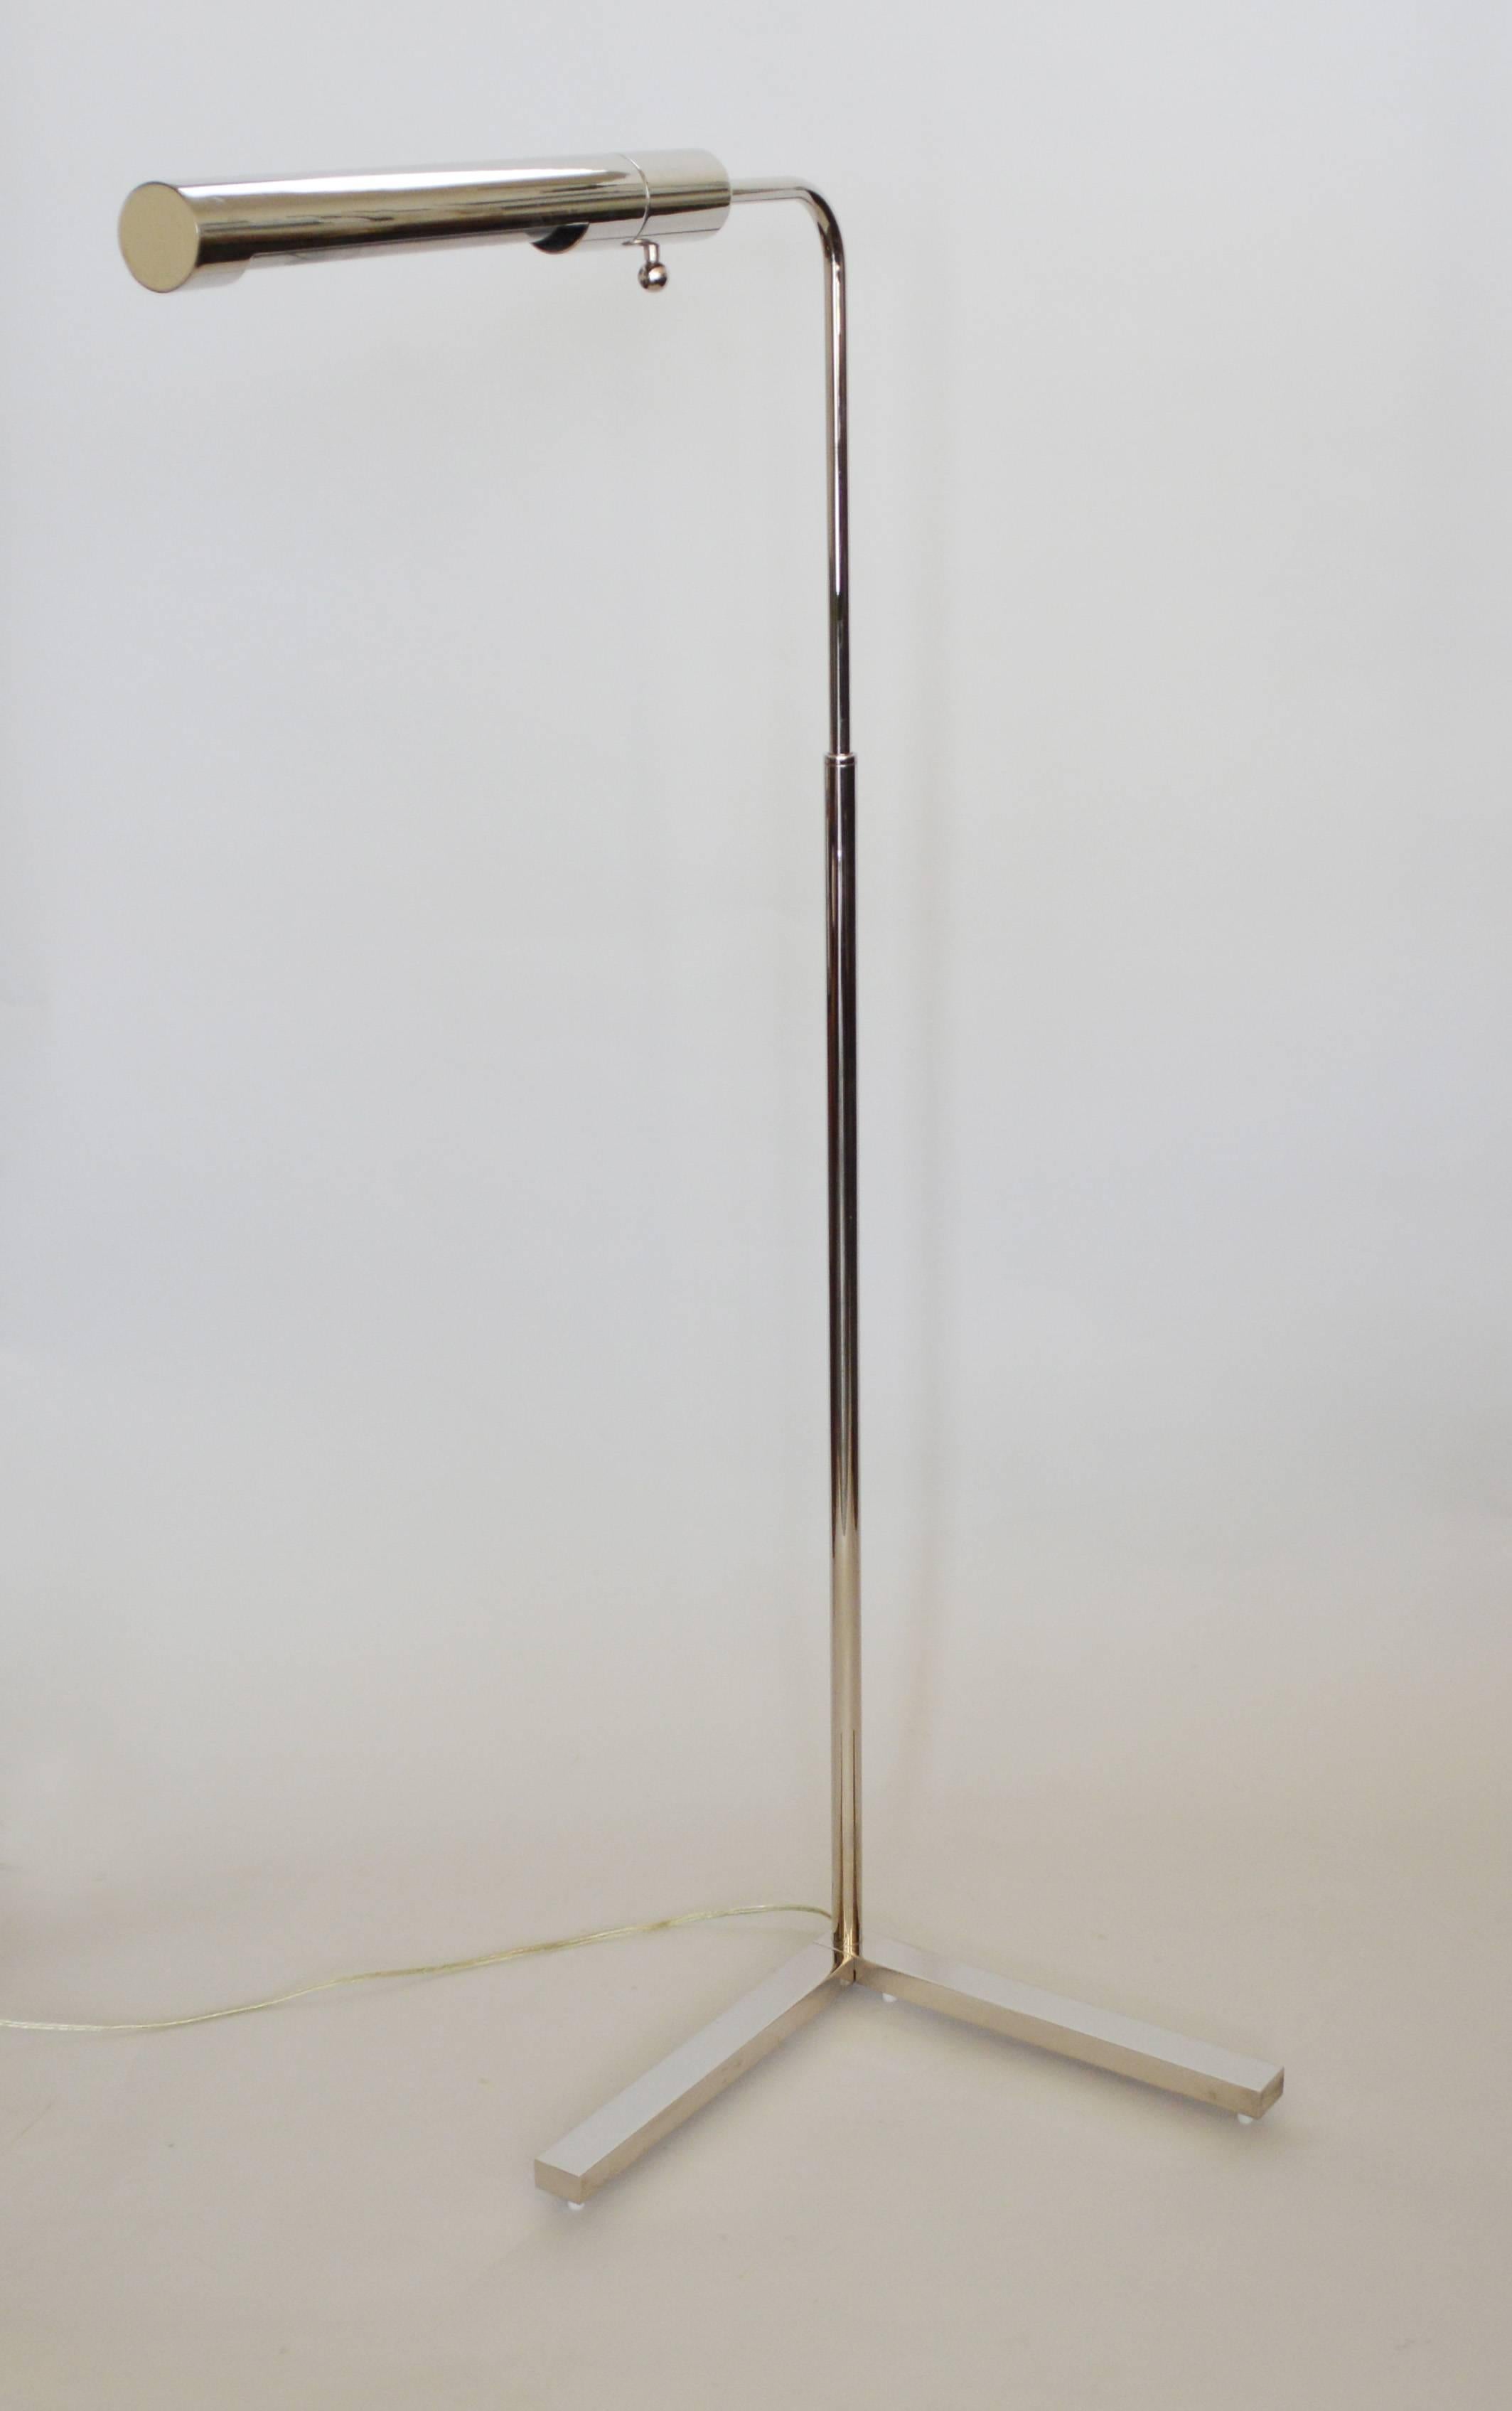 This high quality reading lamp is finished in a polished nickel plate. This has a dimmer switch. This lamp was probably made by Casella. The height is adjustable from 34